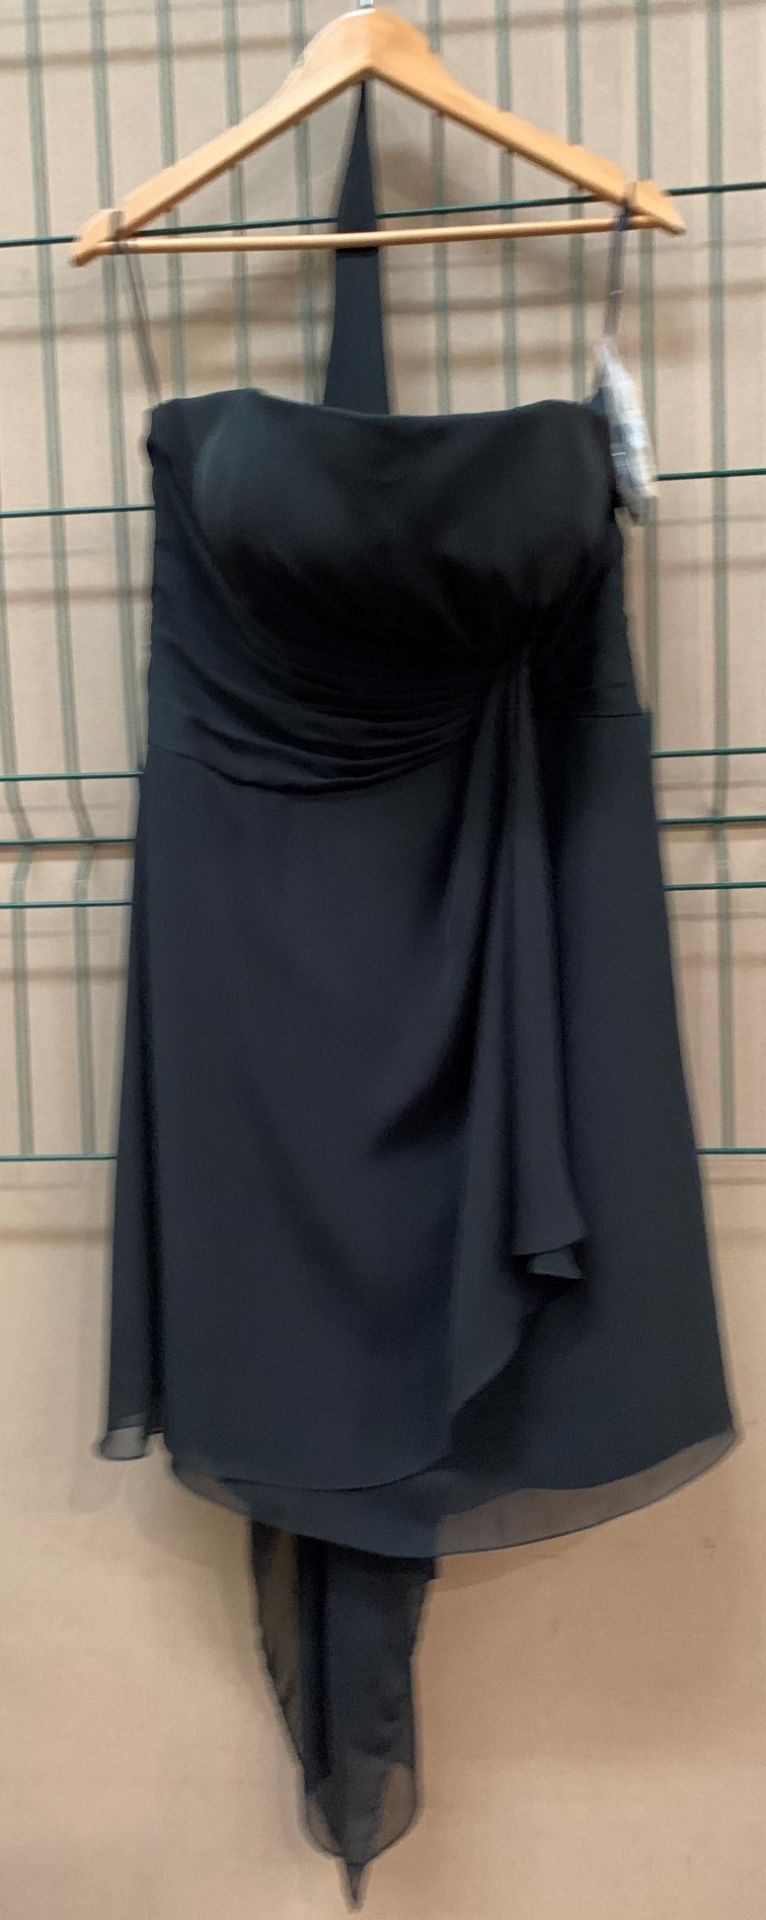 A bridesmaid/prom dress and stole by Tif